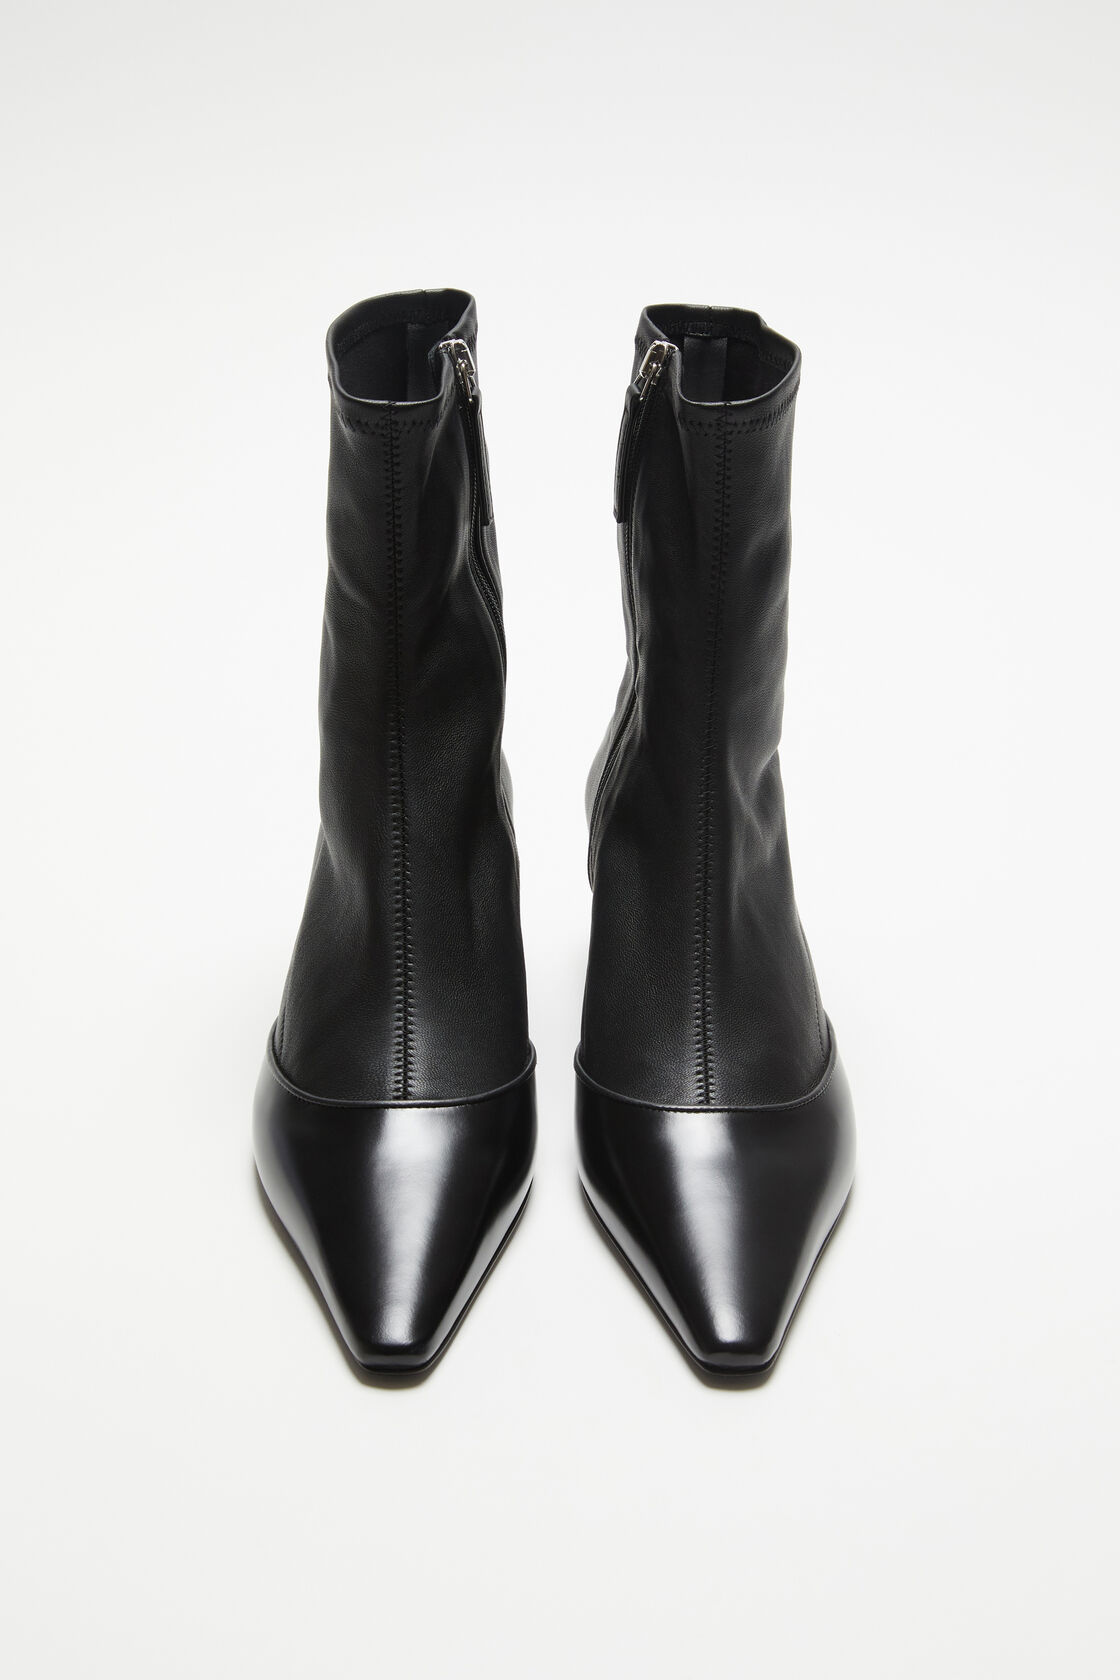 ACNE STUDIOS Ankle Boots in Black 38